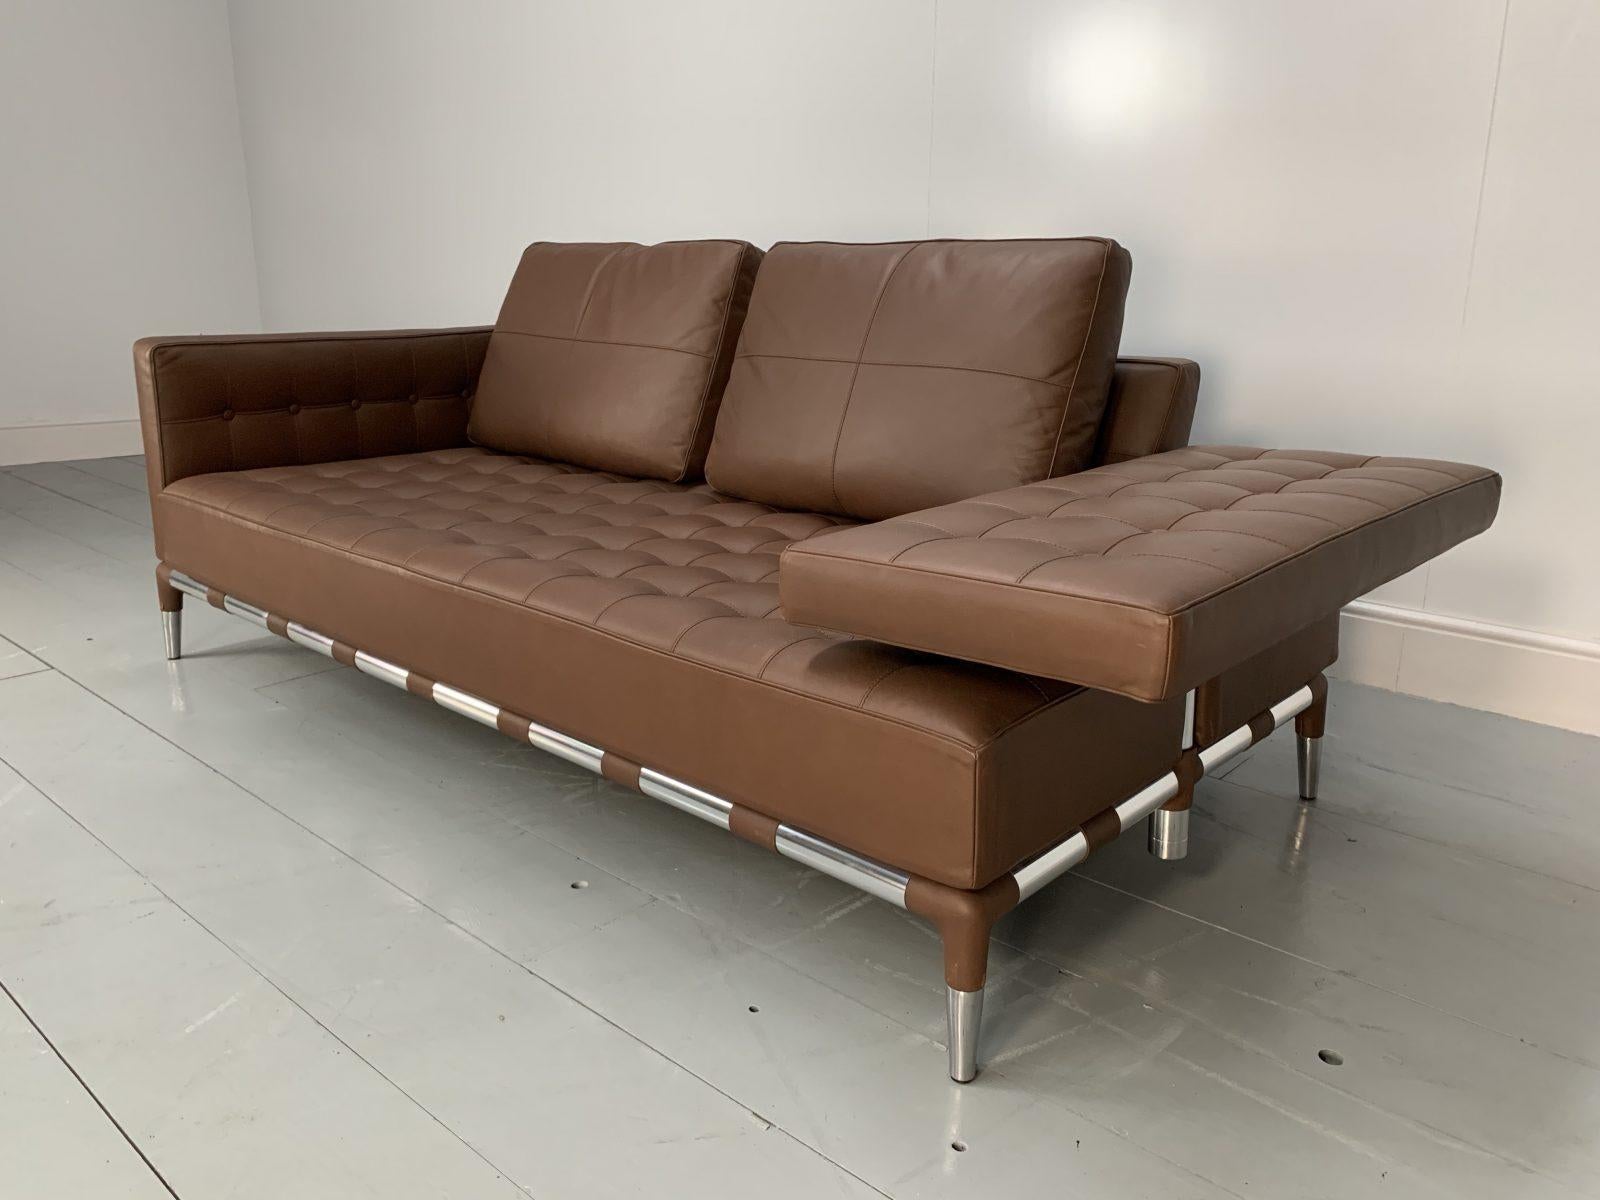 Hello Friends, and welcome to another unmissable offering from Lord Browns Furniture, the UK’s premier resource for fine Sofas and Chairs.
On offer on this occasion is a superb, beautifully-presented “241 Prive Divan0” 241 32 34DX Sofa with